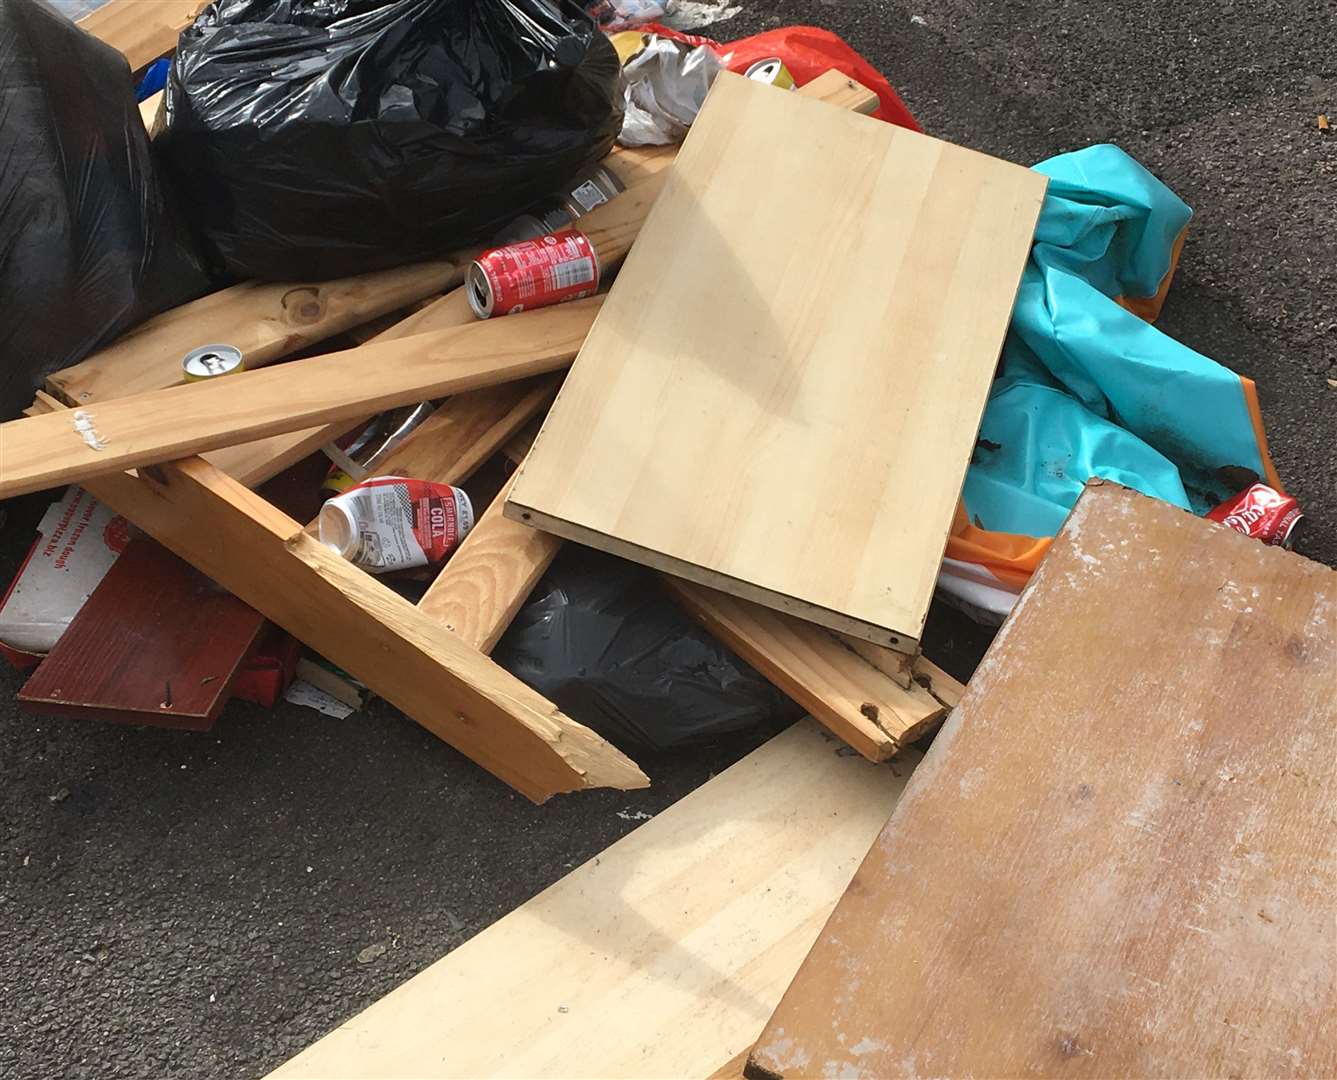 Fly-tippers have targeted Luton Road, Chatham